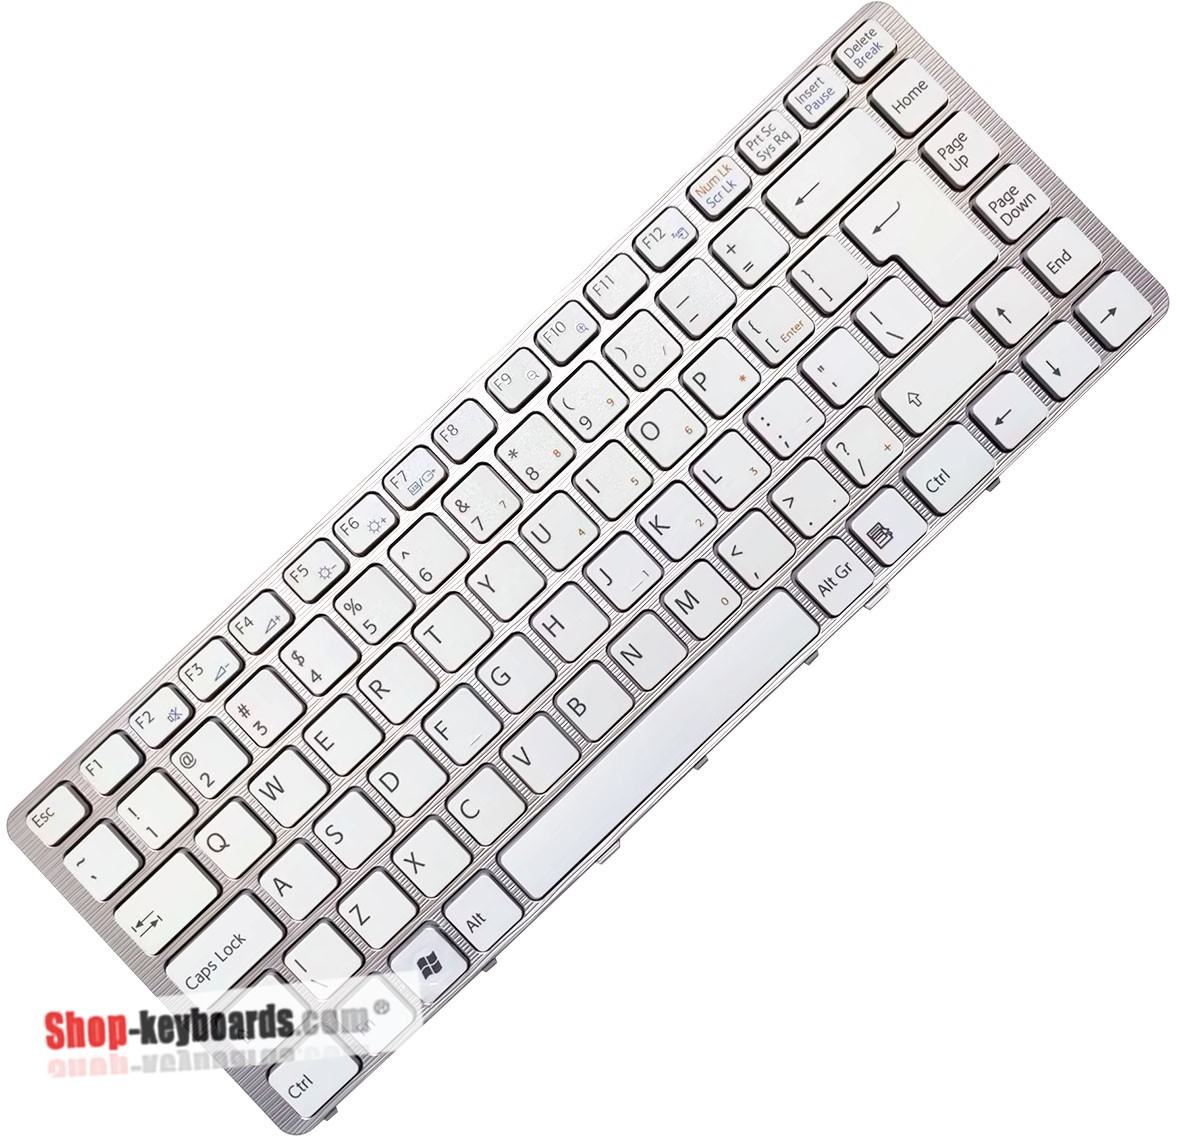 Sony 148738221 Keyboard replacement